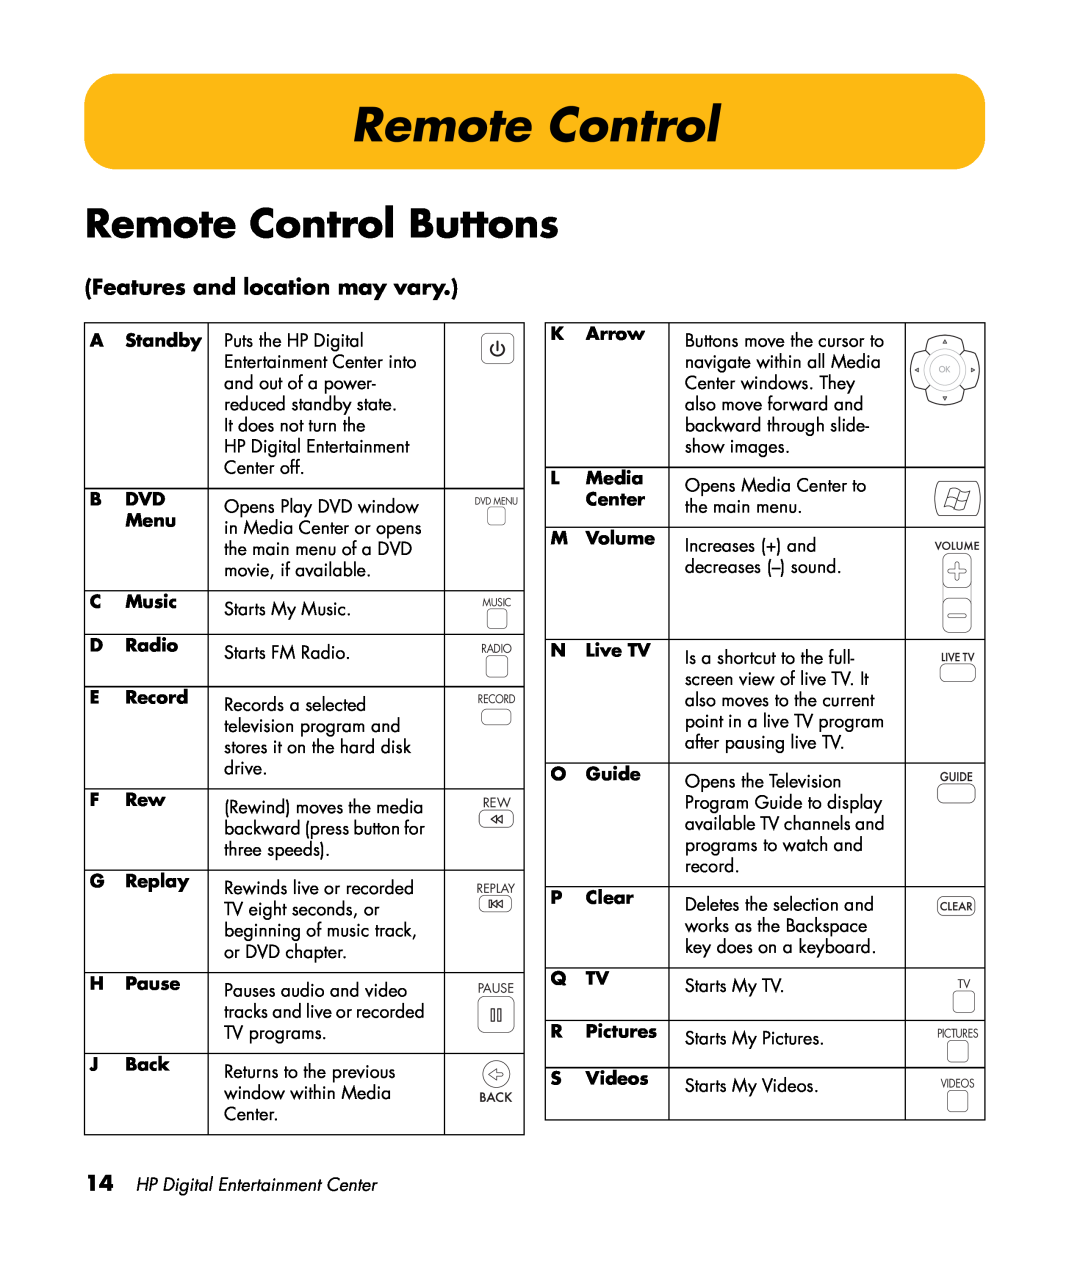 HP z557 Remote Control Buttons, Features and location may vary, Standby, Menu, Music, Radio, Record, Replay, Pause 